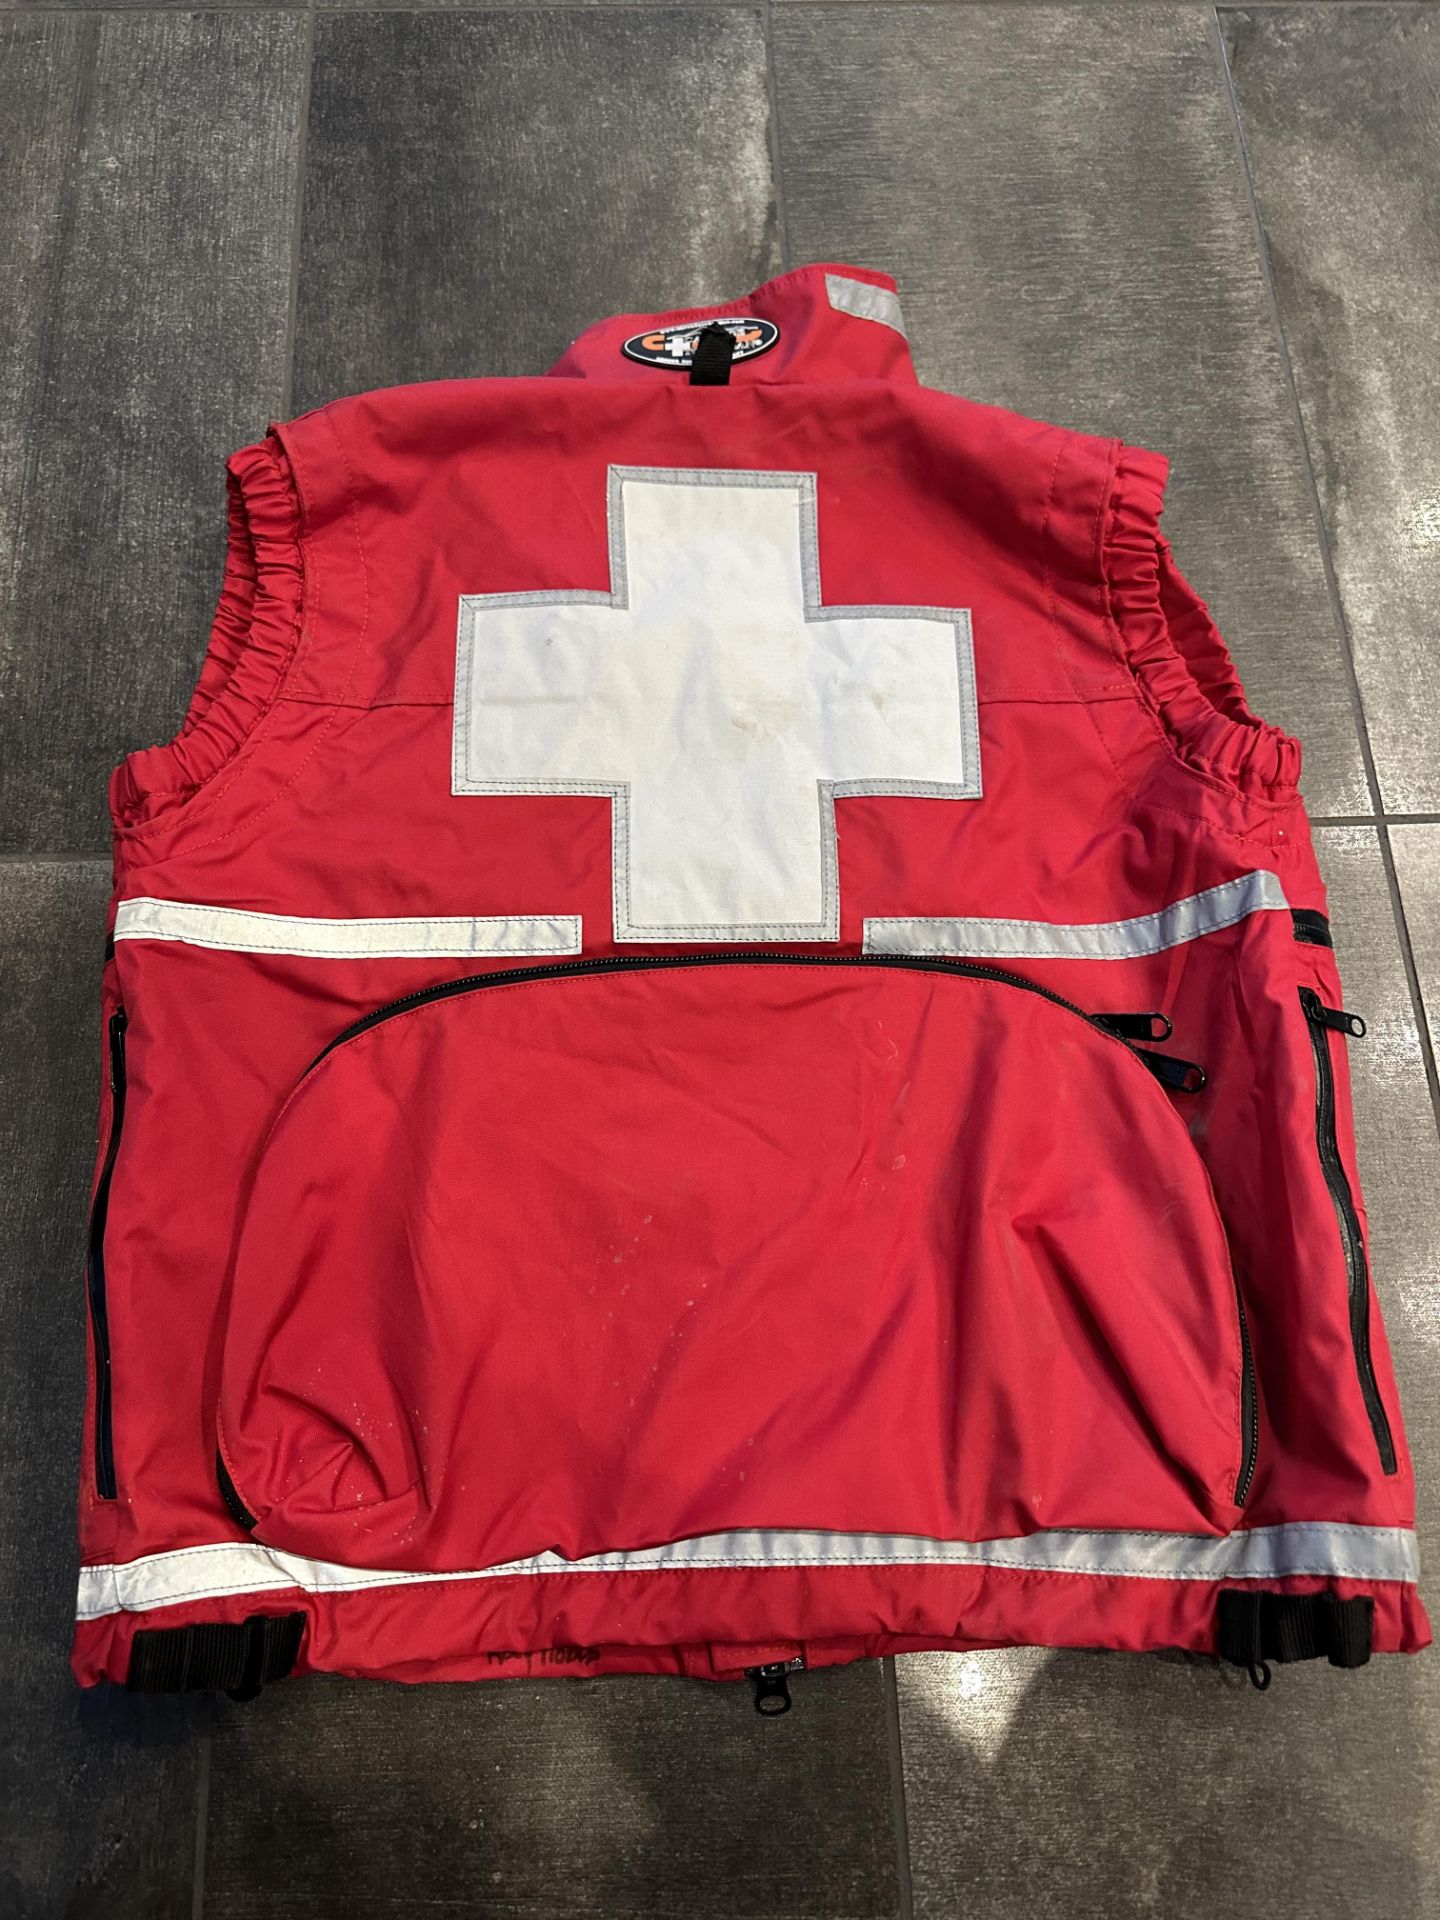 Authentic Rescue Vest For Winter Conditions, Very Warm - Image 3 of 3